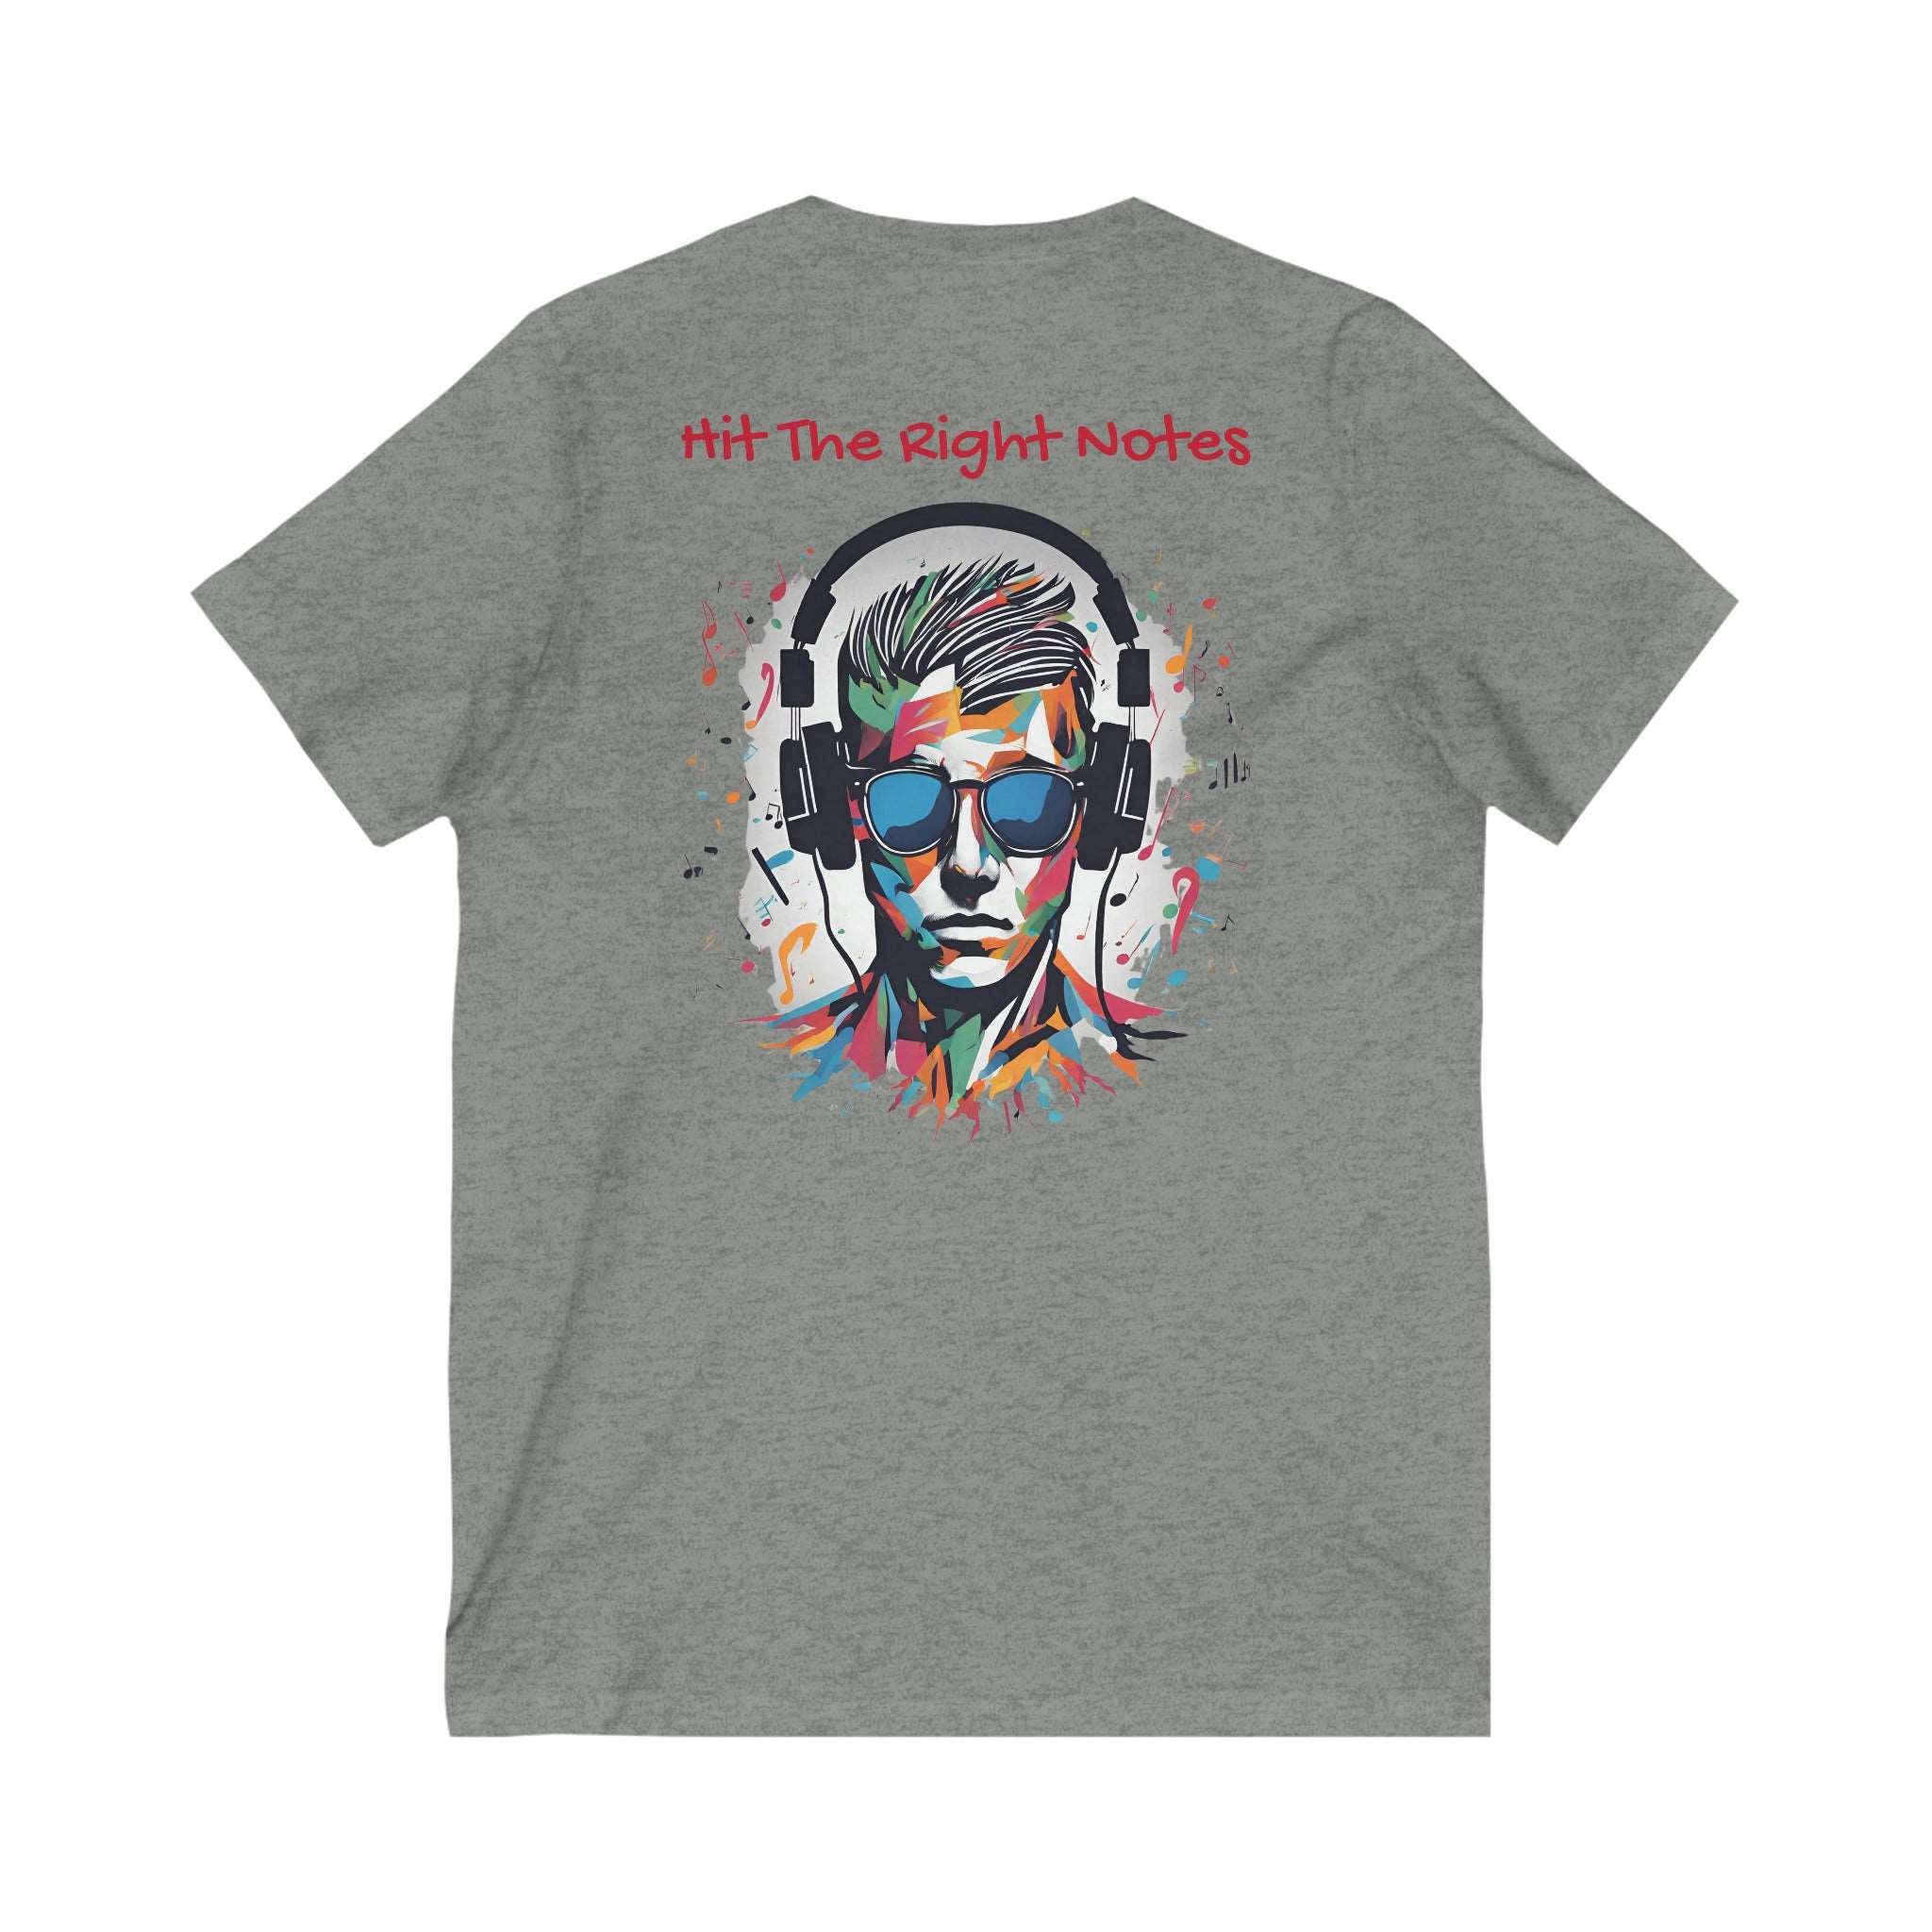 Hit The Right Notes Tee: Start conversations now! Deep Heather Basic T-Shirt Casual Shirt Classic Tee Comfortable Tee Cotton T-Shirt Everyday Wear Graphic Tee Statement Shirt T-shirt Tee Collection Tee for all Tee for Men Tee for Women Unisex Apparel Vintage Tee V-neck 4310777205891930140_2048_f1fade68-b866-479c-8c39-cf100dca8300 Printify